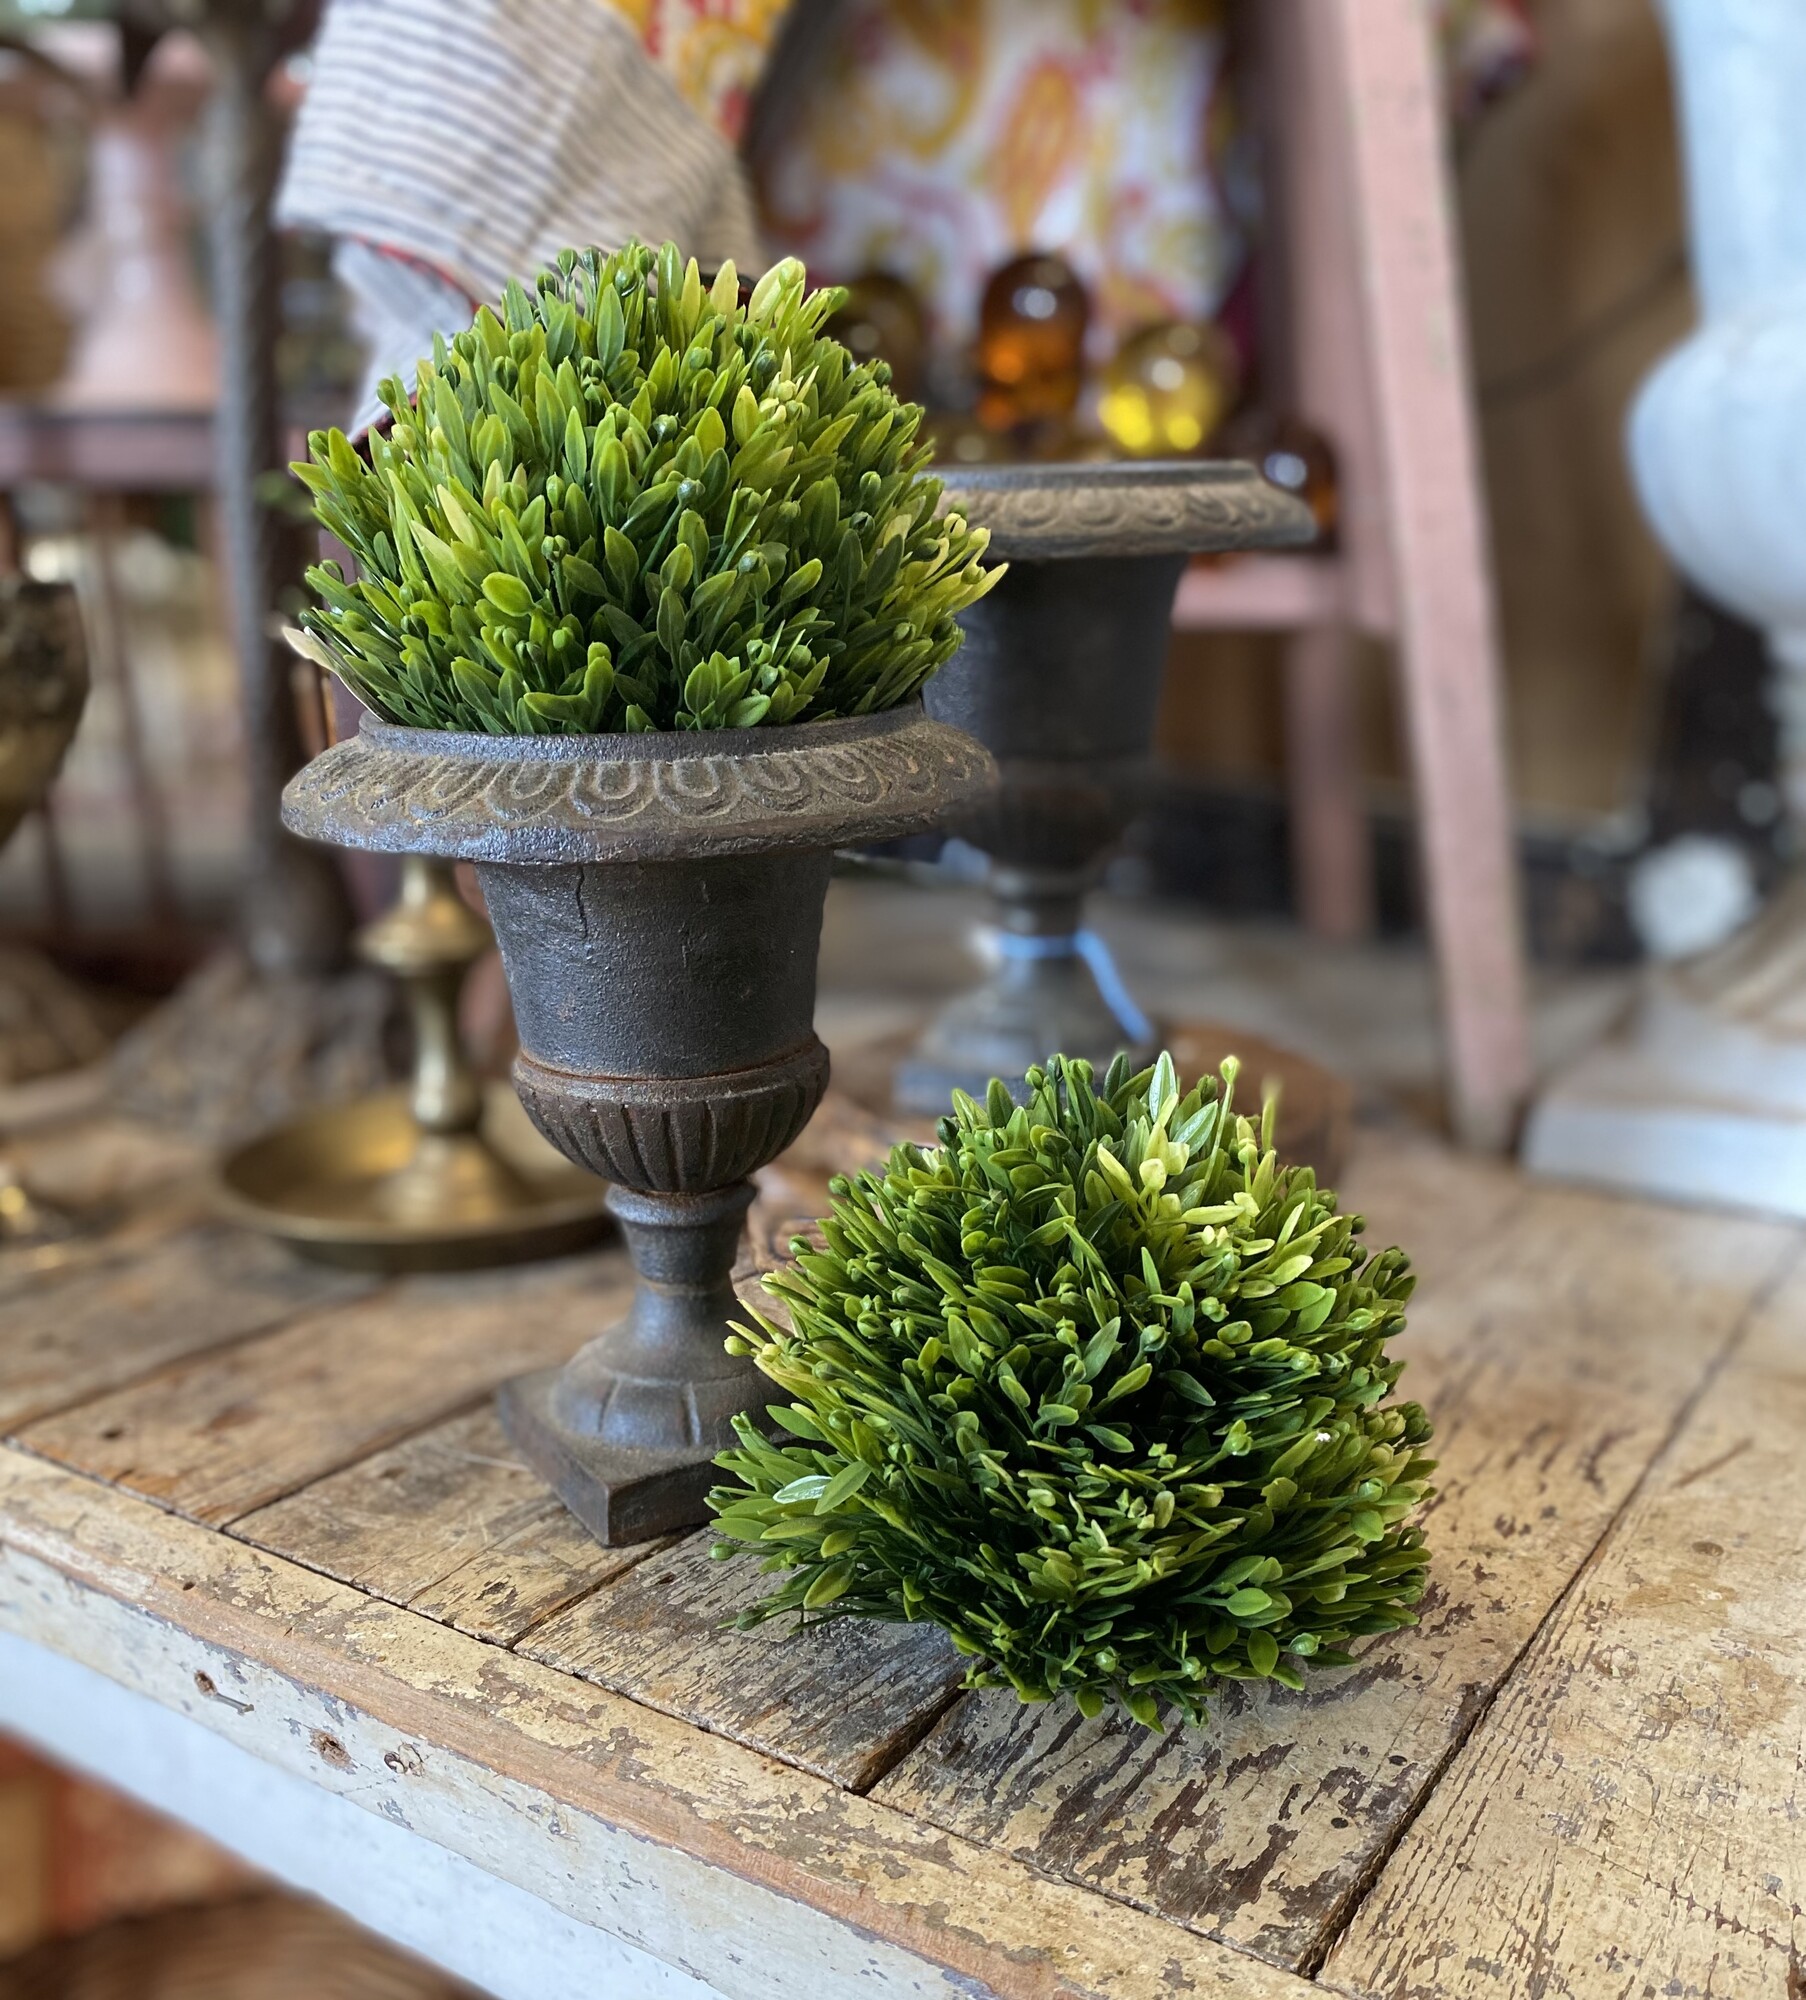 This sweet half sphere with neutral green leaves is a great addition to decorative bowls, baskets, vases or trays. This sphere is a perfect fit for or small goddess head. Add color and texture to any space
Measures 5.5 in high by 5.5 in in diameter